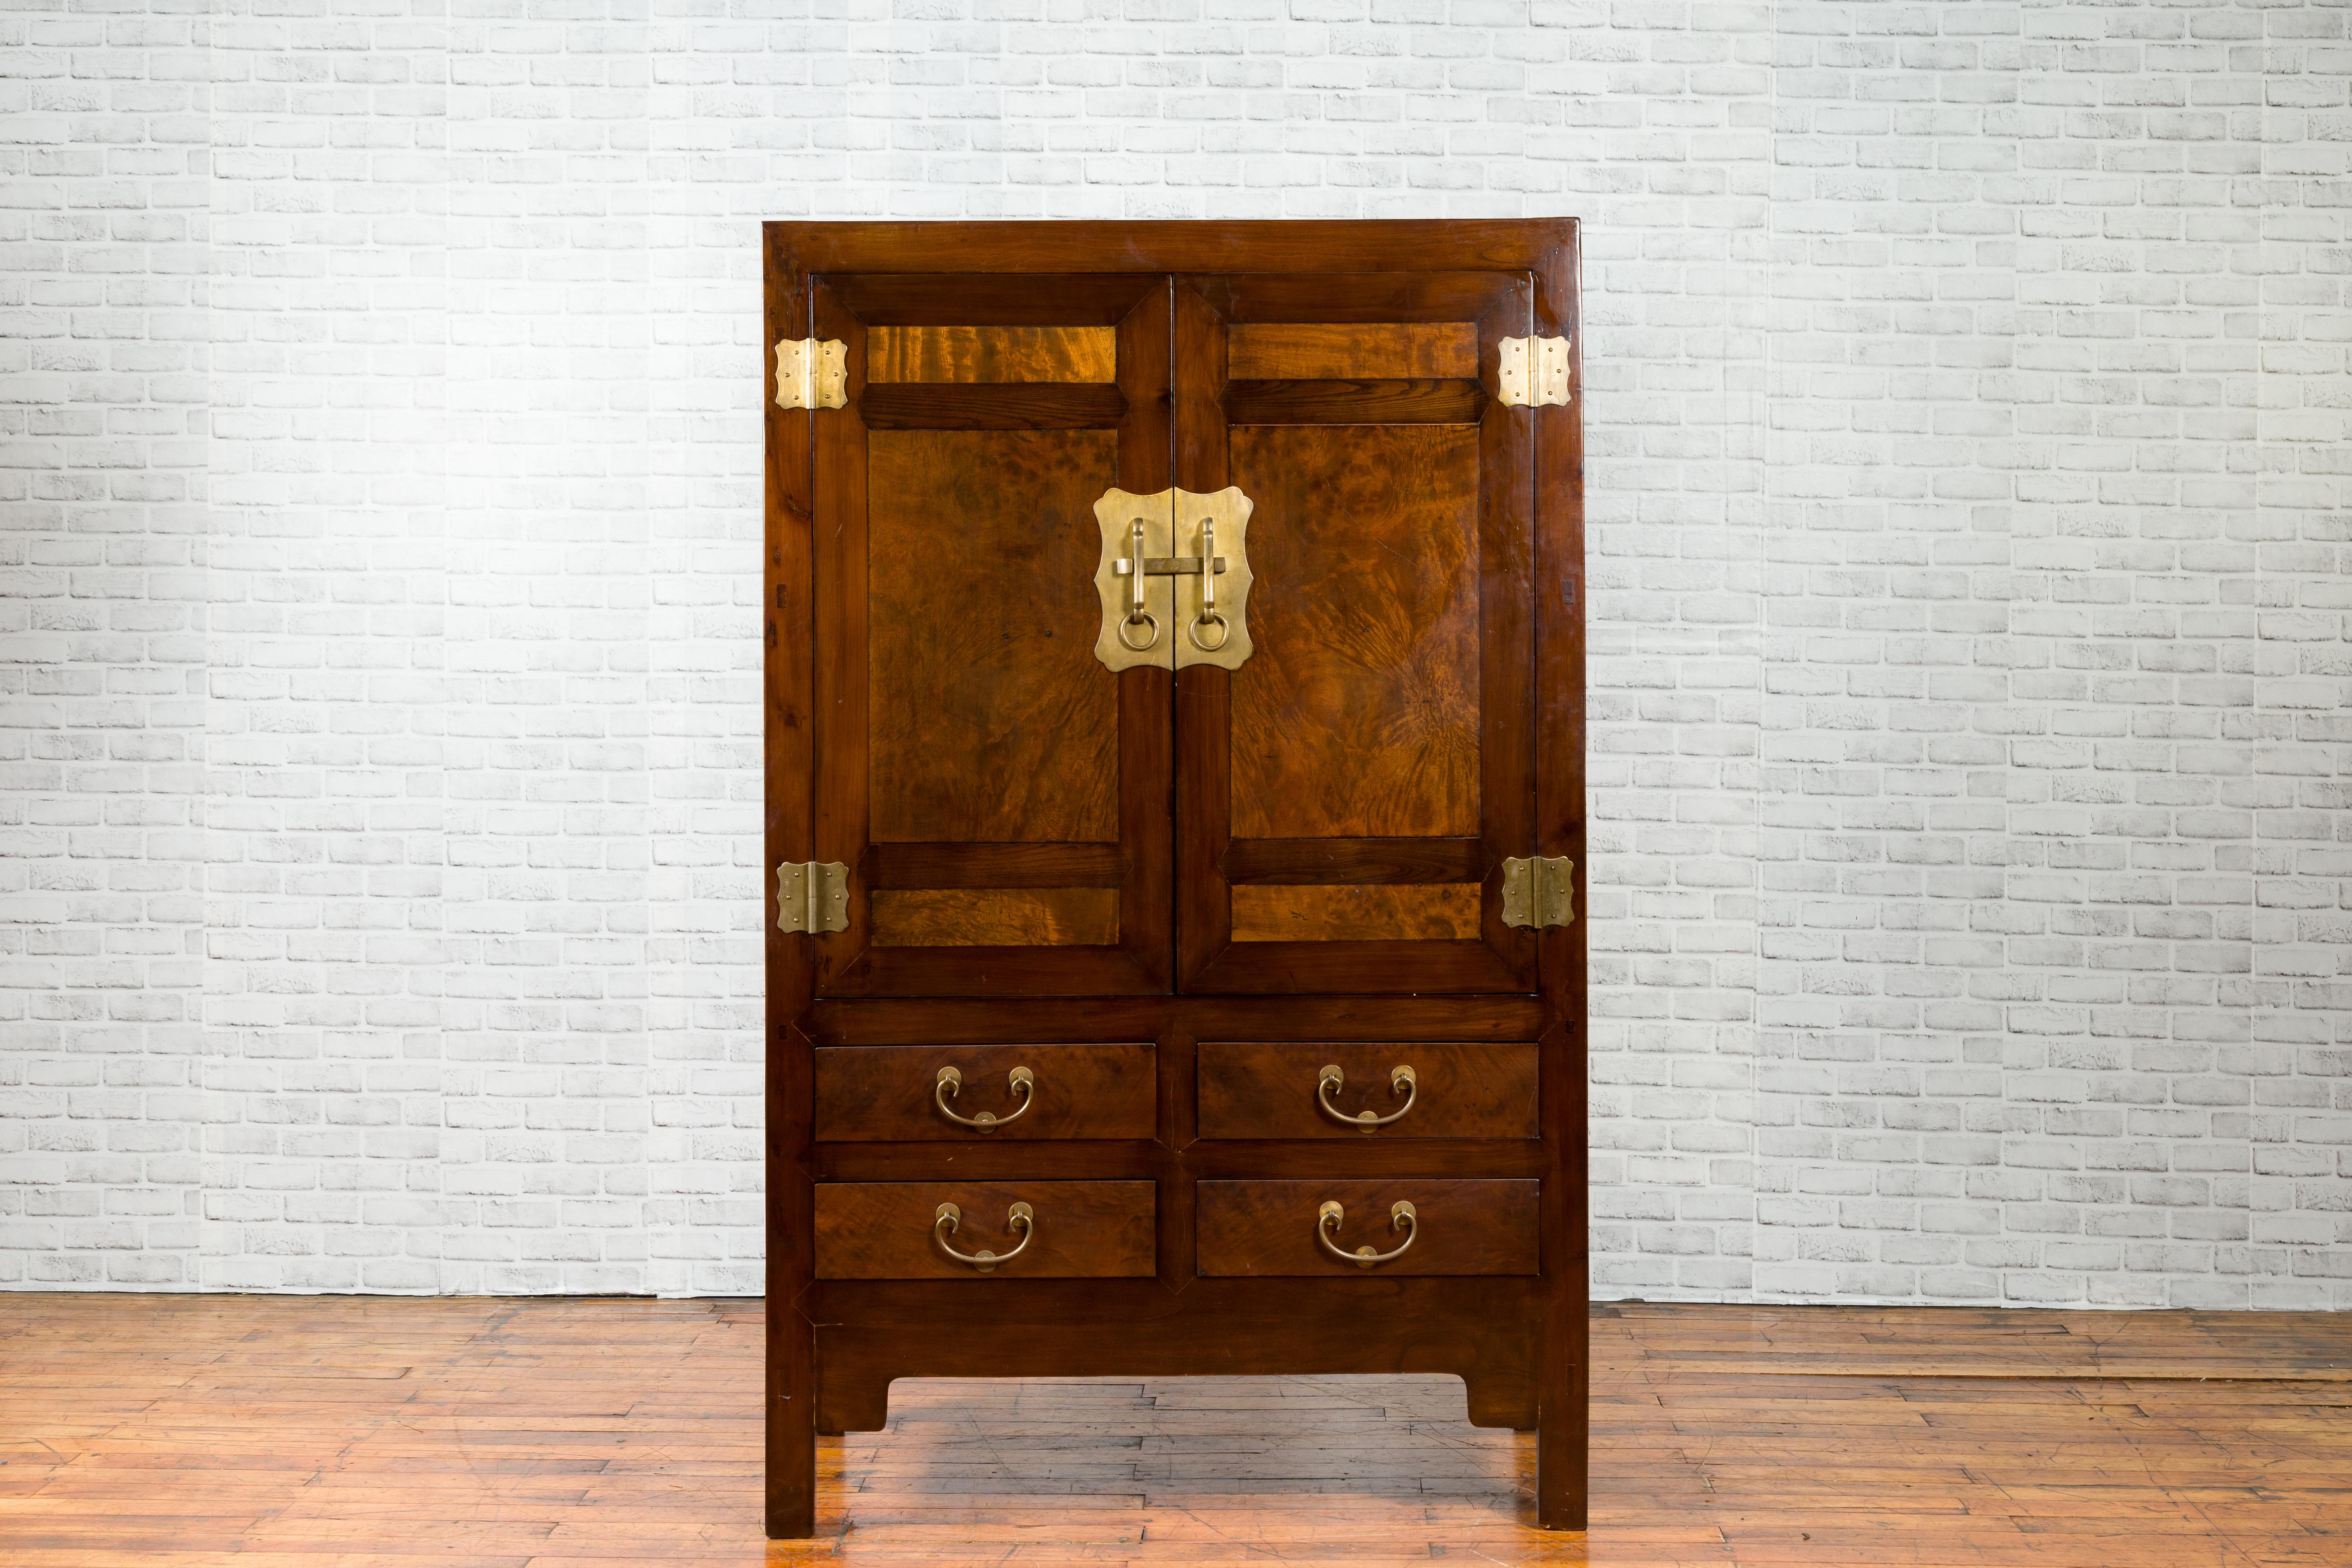 Chinese 1920s-1930s Elm and Burl Cabinet with Doors, Drawers and Brass Hardware In Good Condition For Sale In Yonkers, NY